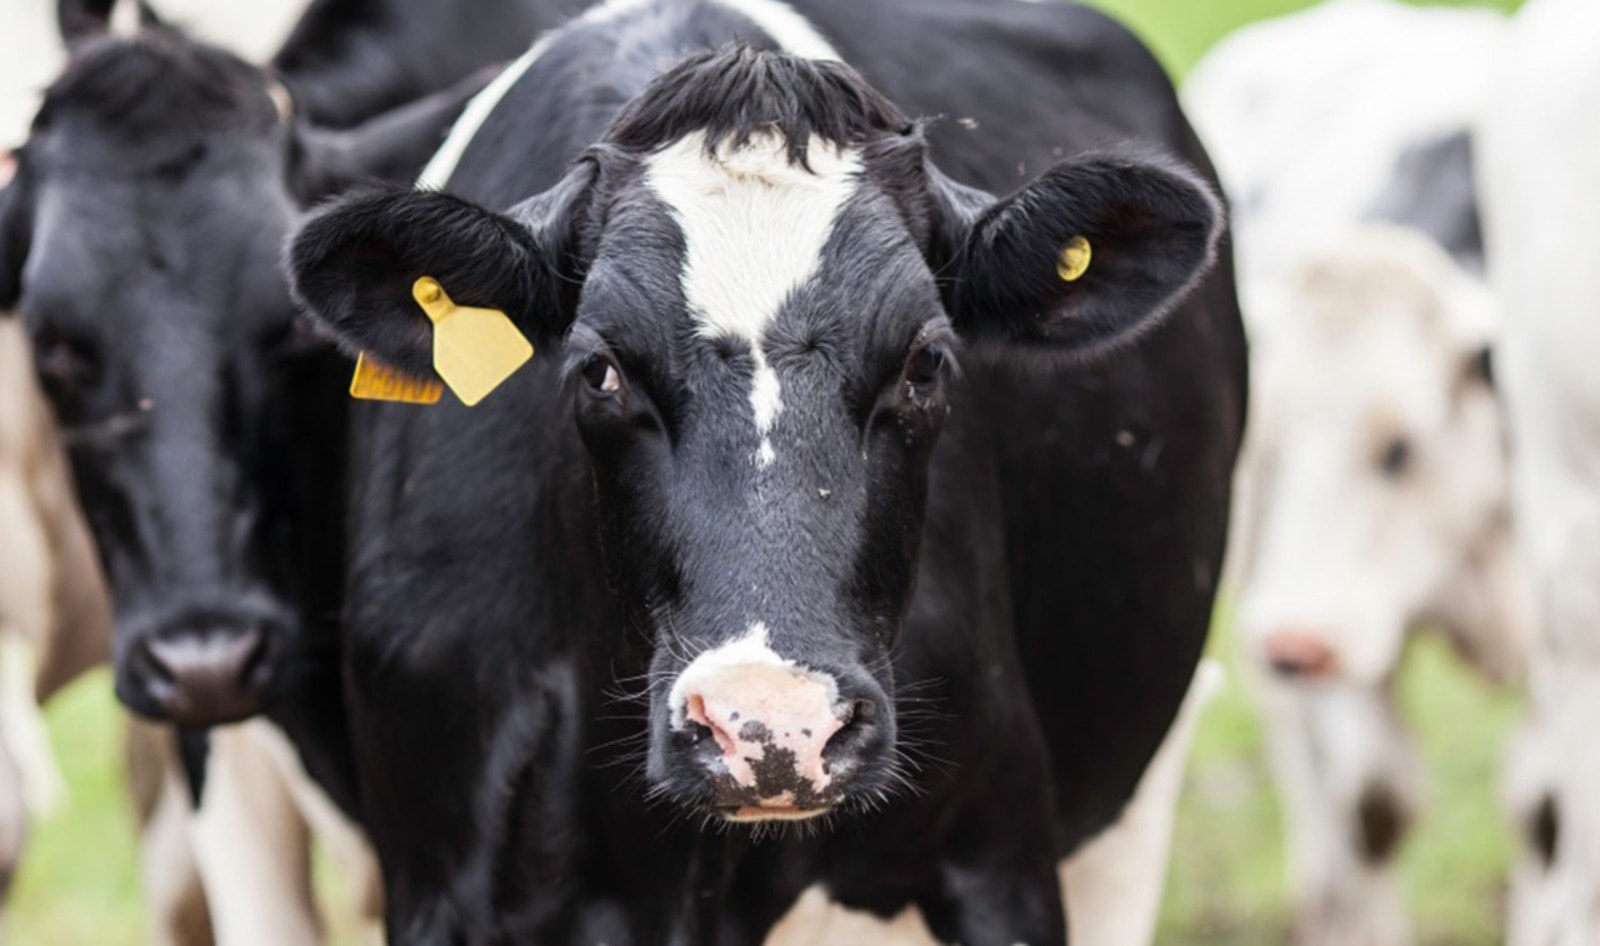 Animal Agriculture Surpasses Oil as Largest Polluter in the World